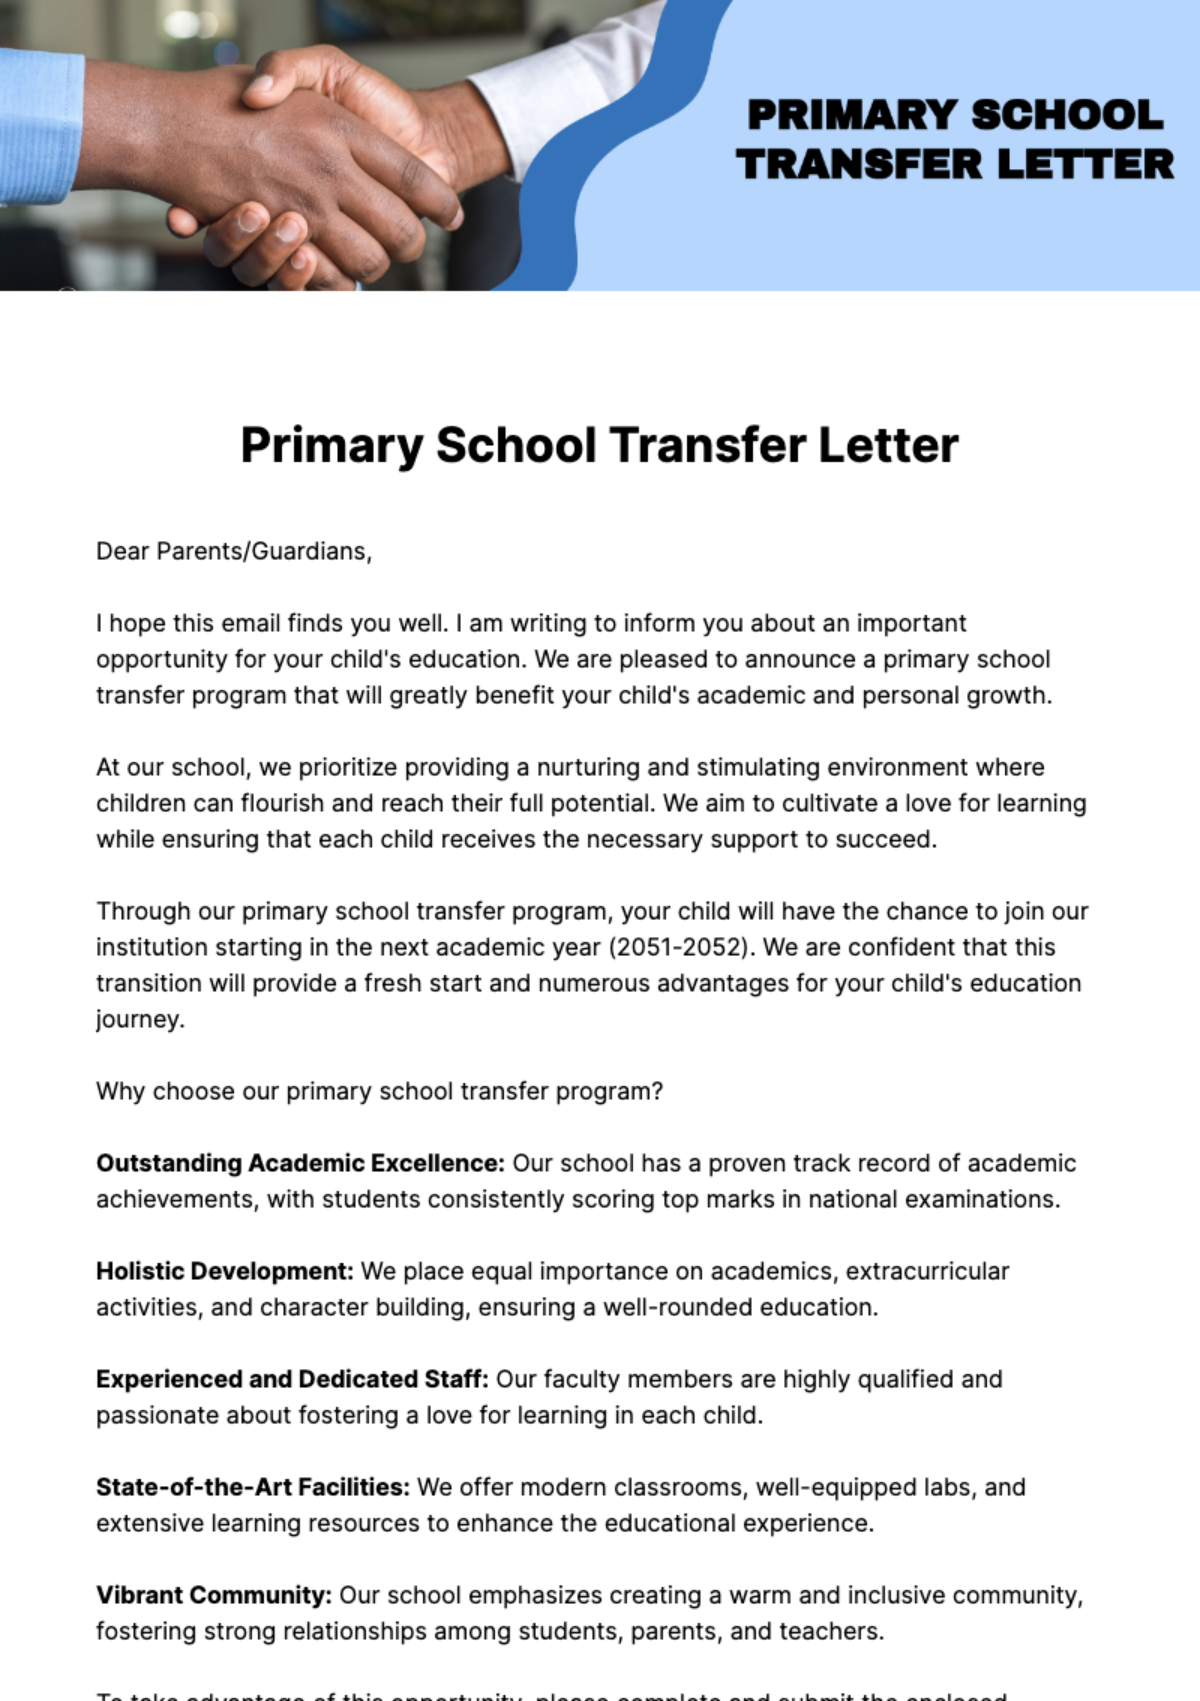 Primary School Transfer Letter Template